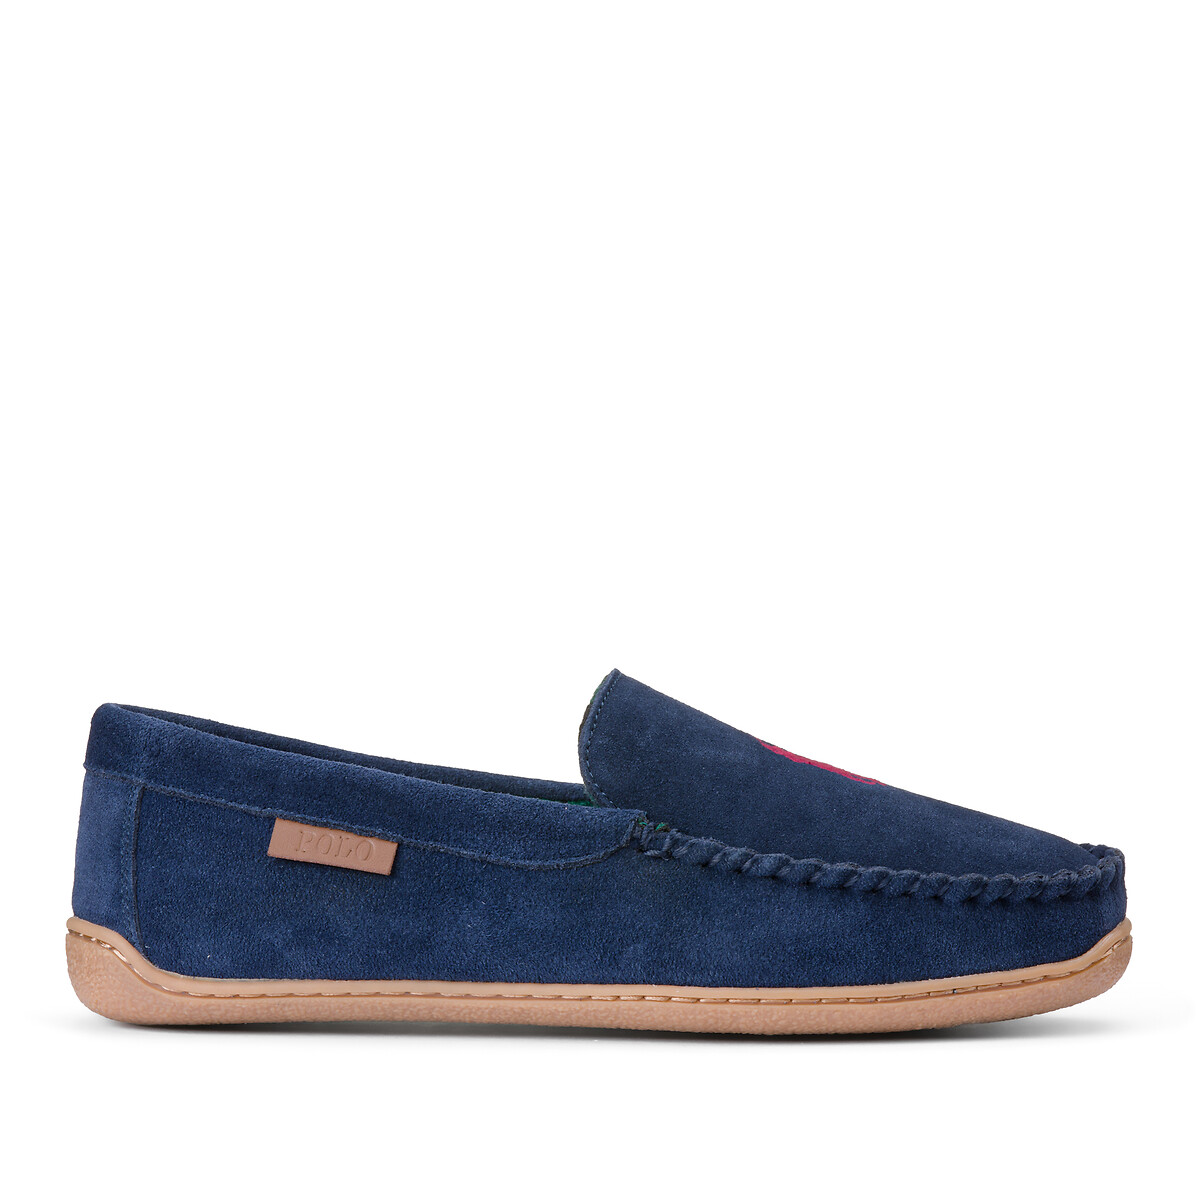 Image of Brenan Suede Loafer Slippers with Faux Fur Lining